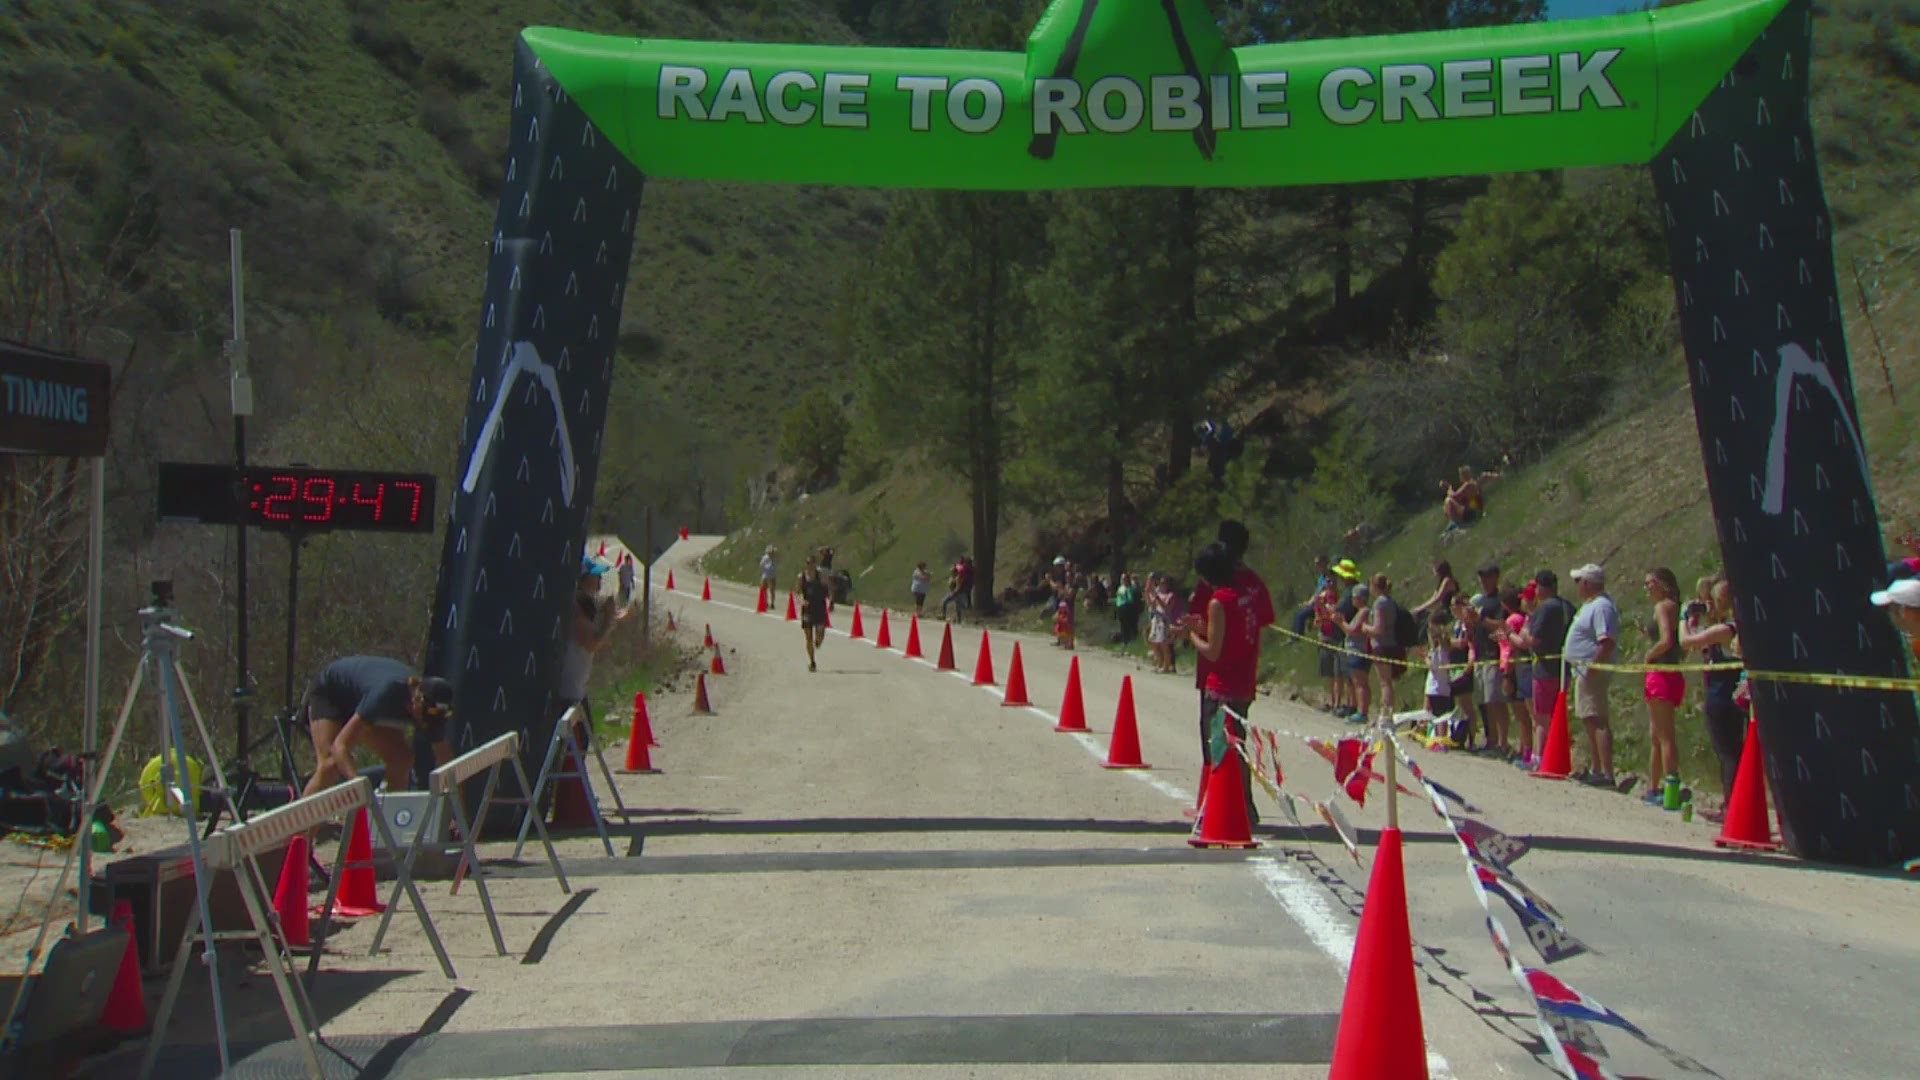 Second 10 minutes of runners crossing finish line in 41st annual Race to Robie Creek